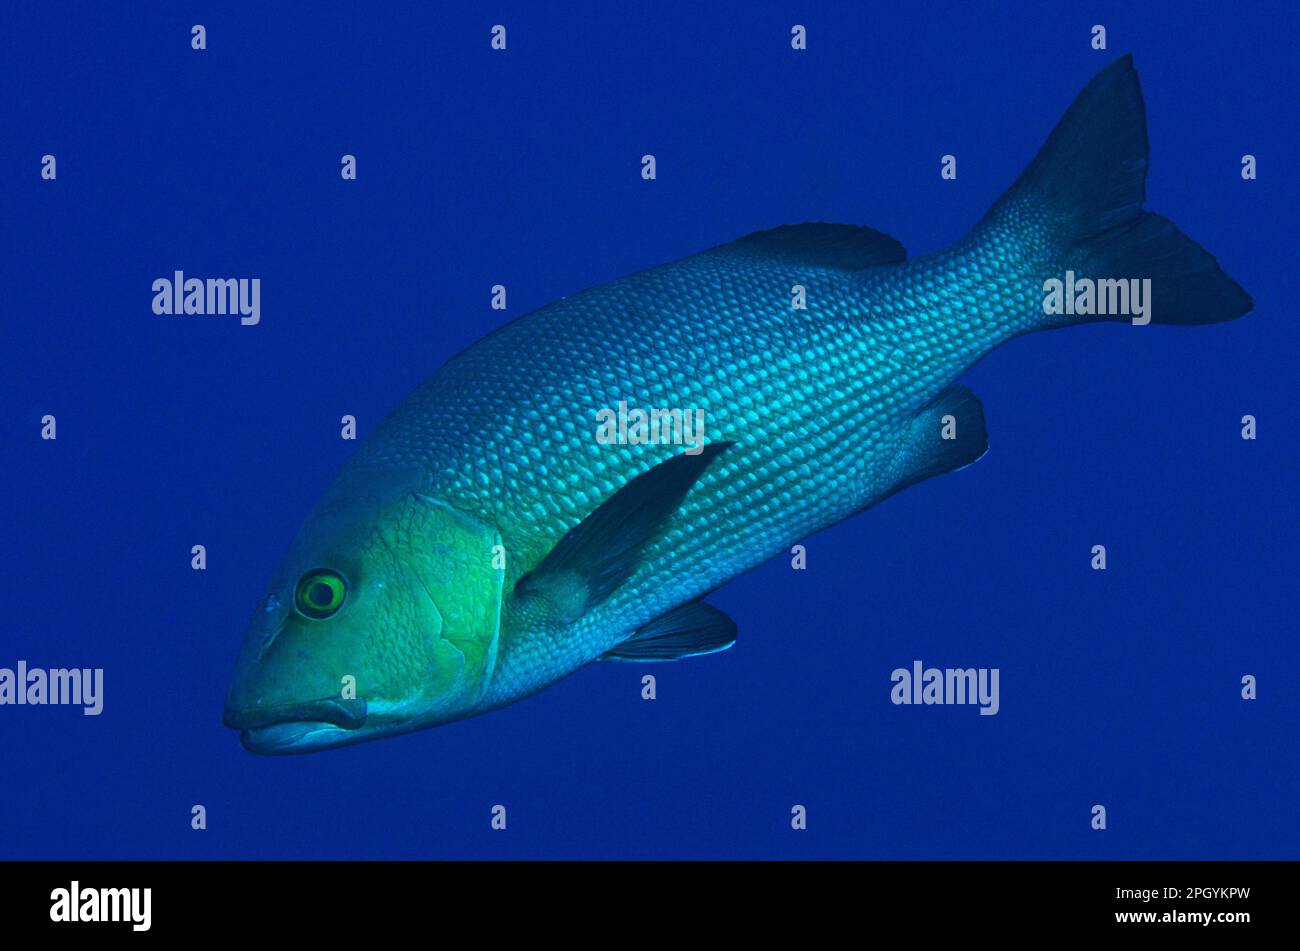 Two-spot red snapper (Lutjanus bohar), Other animals, Fishes, Perch-like, Animals, Two-spot Red Snapper adult, swimming, Reong West, Wetar Island Stock Photo